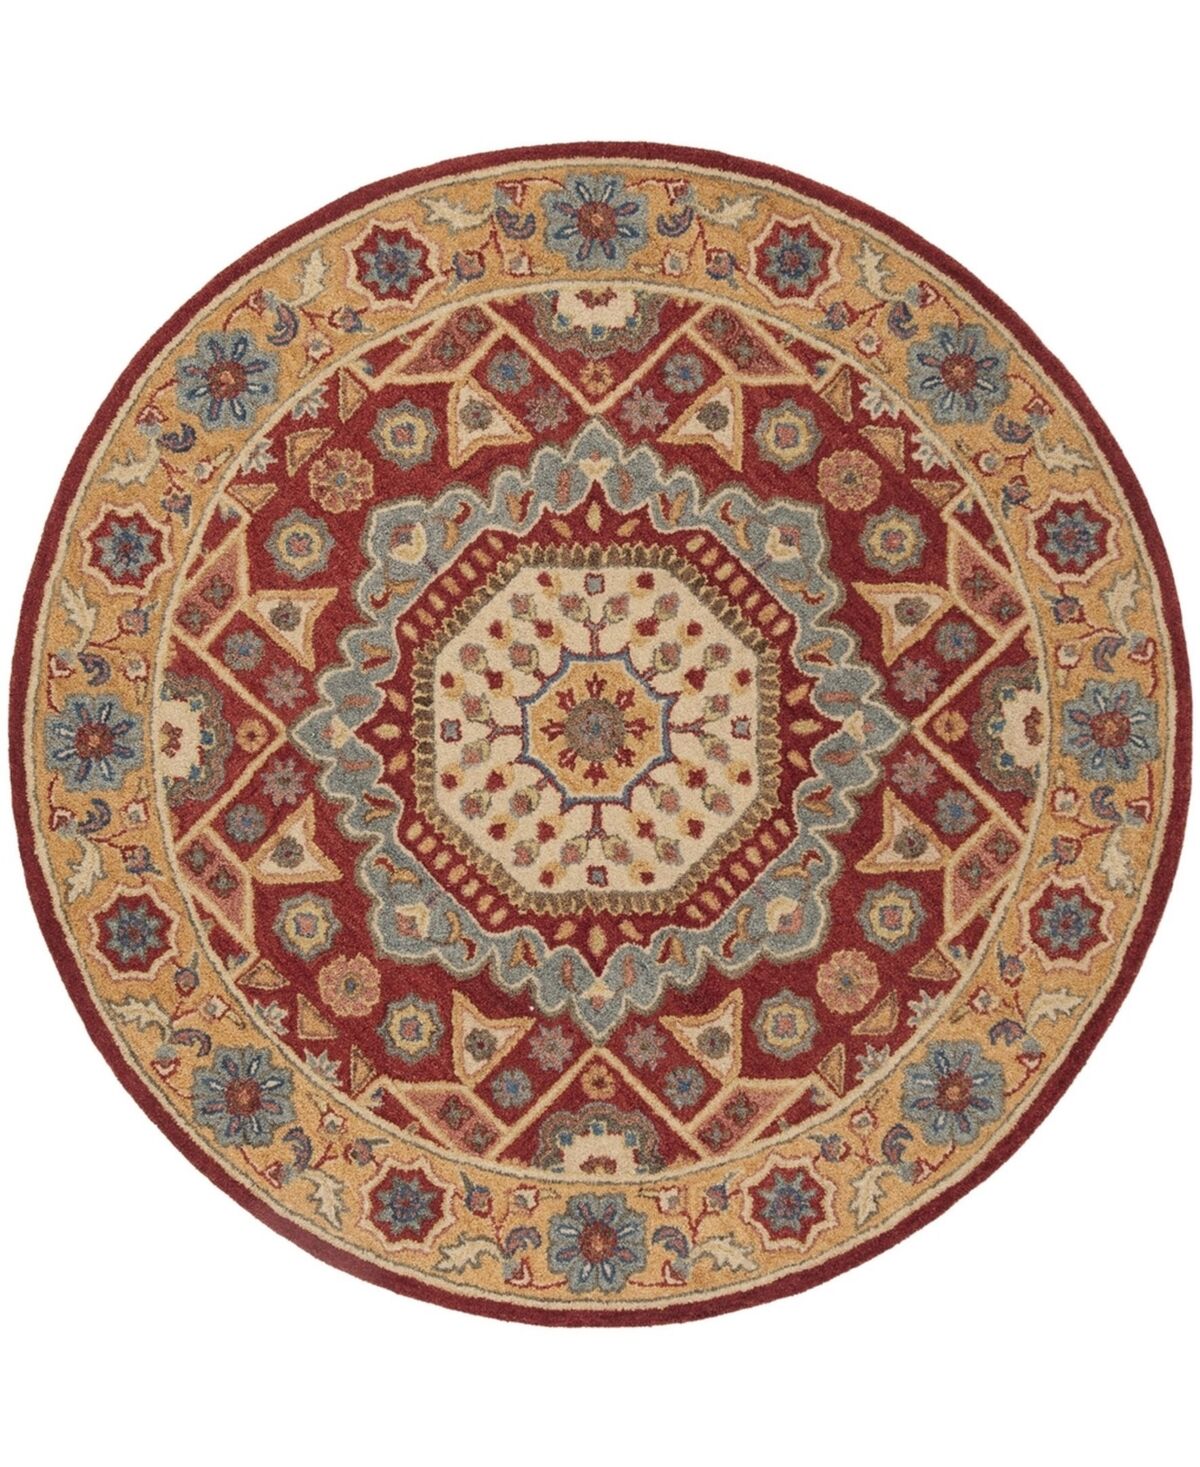 Safavieh Antiquity At501 Red and Orange 6' x 6' Round Area Rug - Red